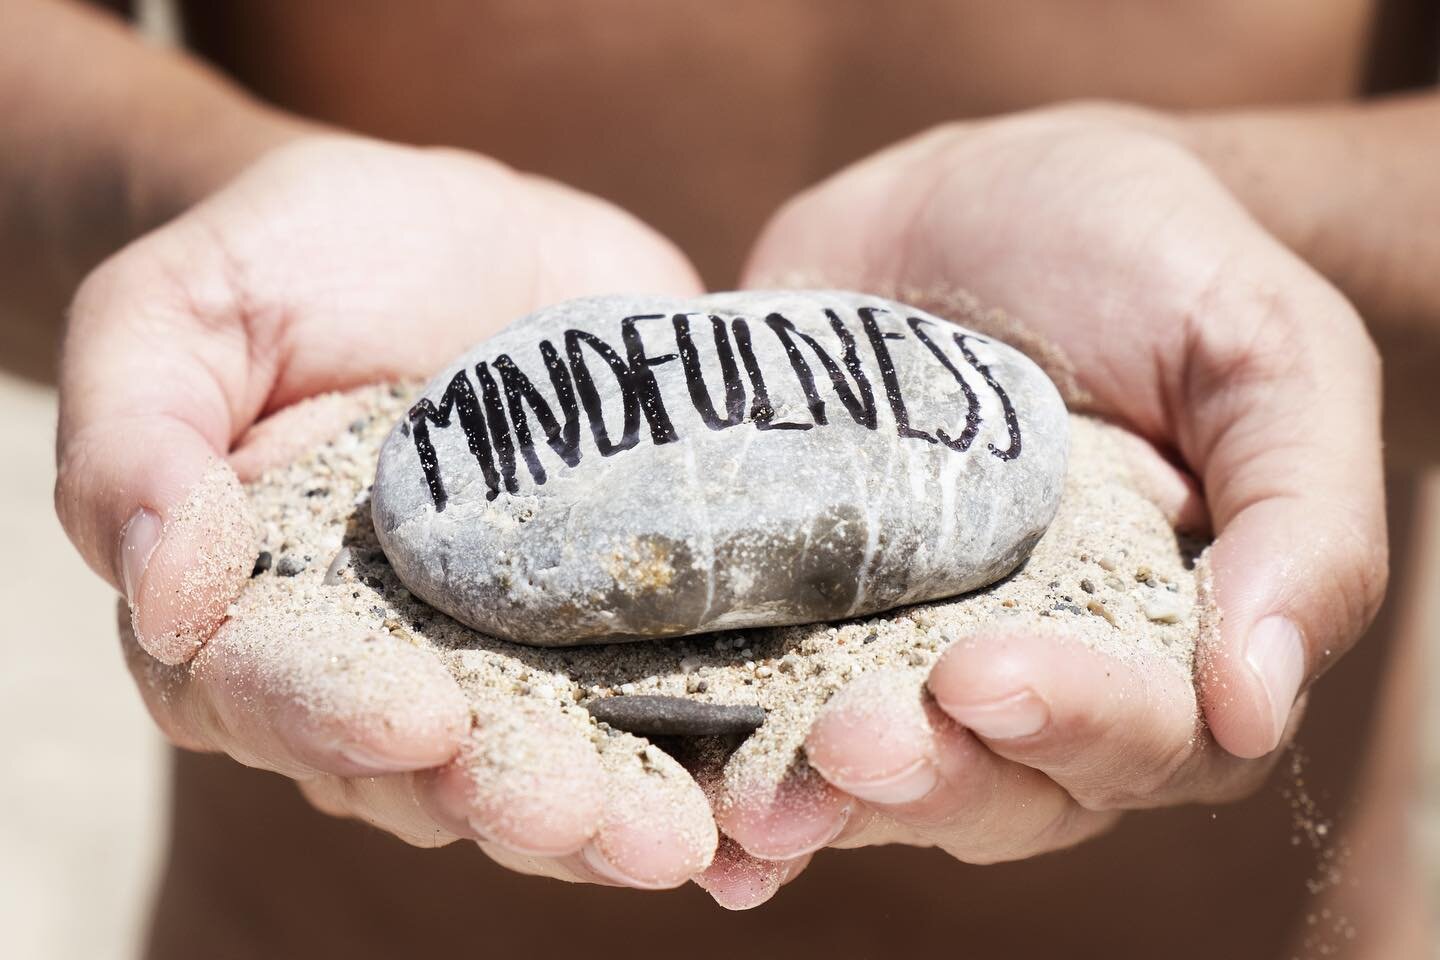 There is a reason why mindfulness is said to be a lifelong practice. We don&rsquo;t wake up one day and are suddenly mindfulness experts. Like working out or training physically, we need to build up our mindfulness &ldquo;muscles.&rdquo; We have to c